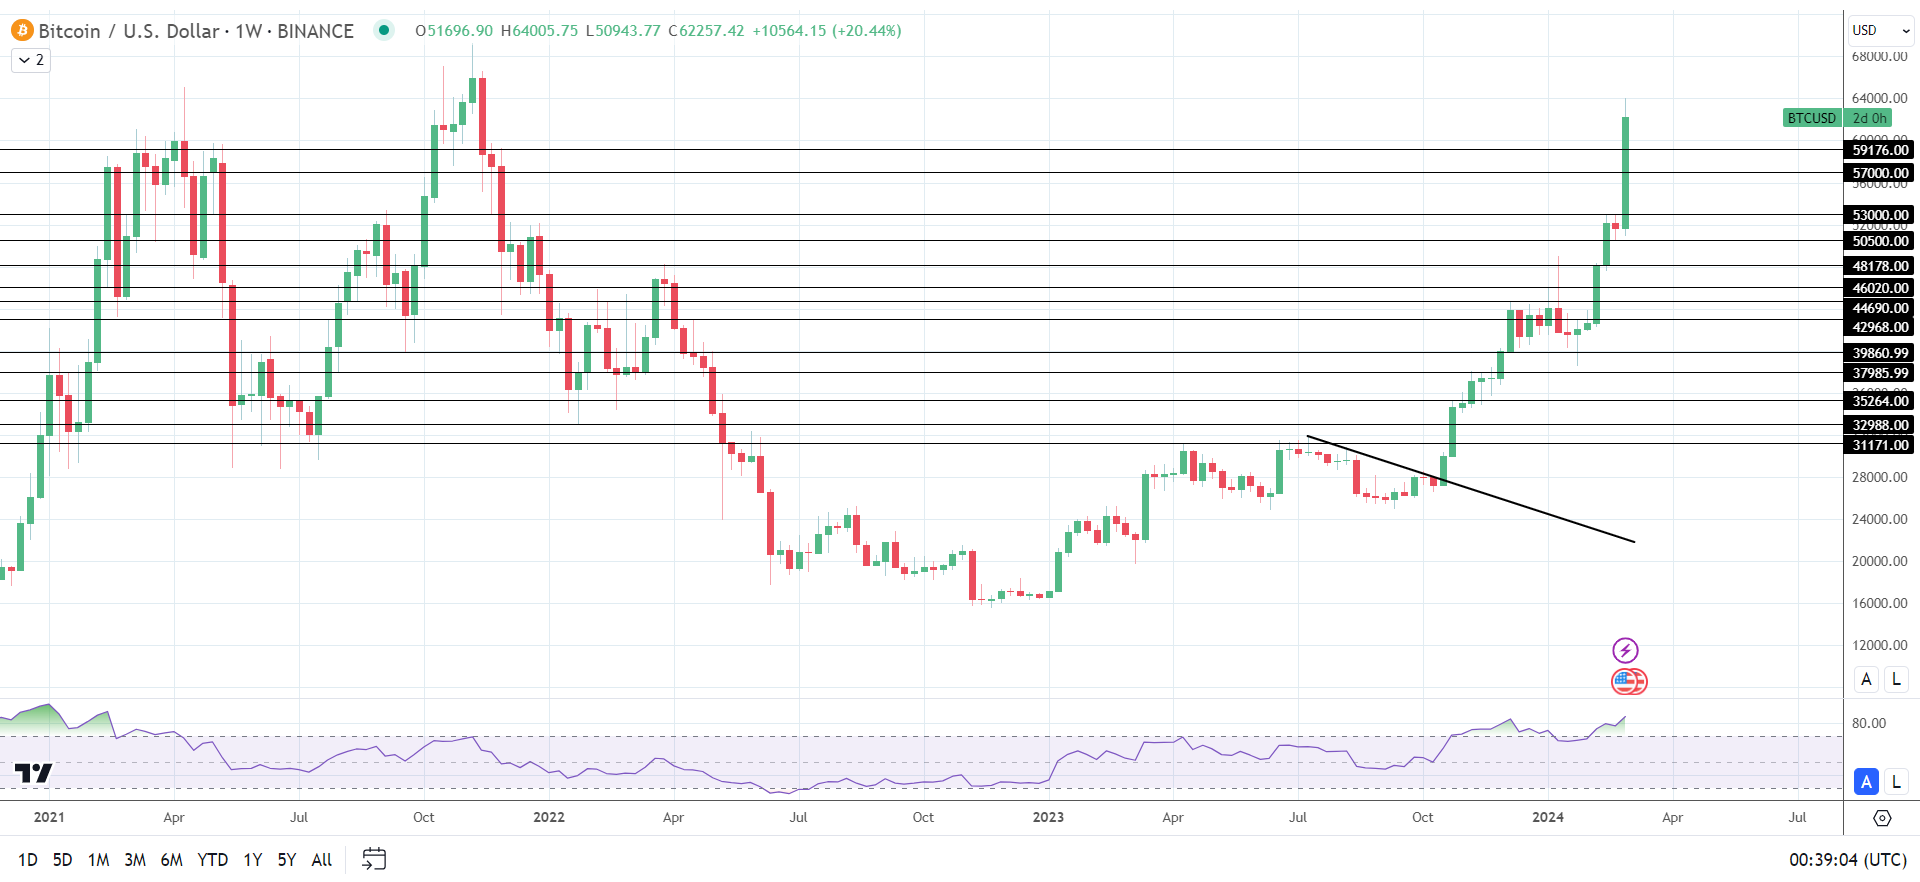 BTC revisits $64,000 for the first time since November 2021